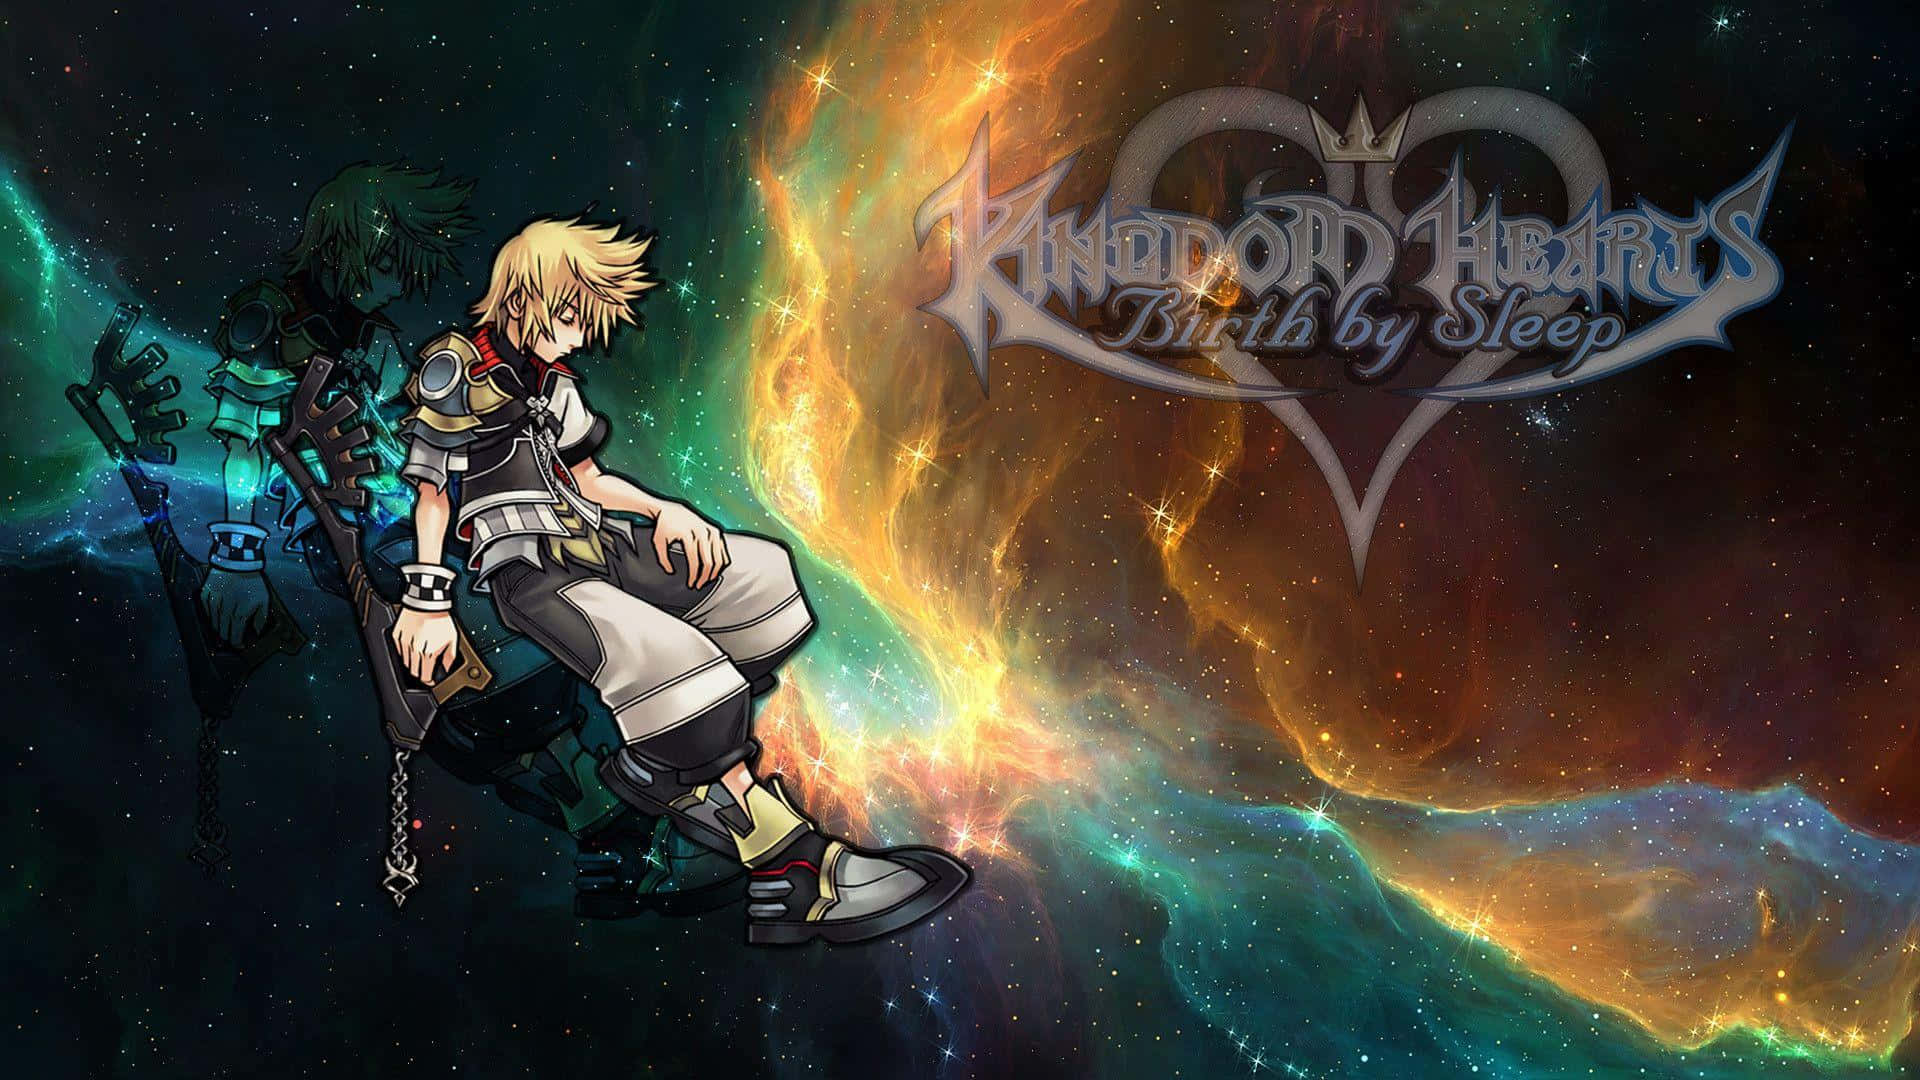 "Join Roxas on his magical journey in Kingdom Hearts!" Wallpaper